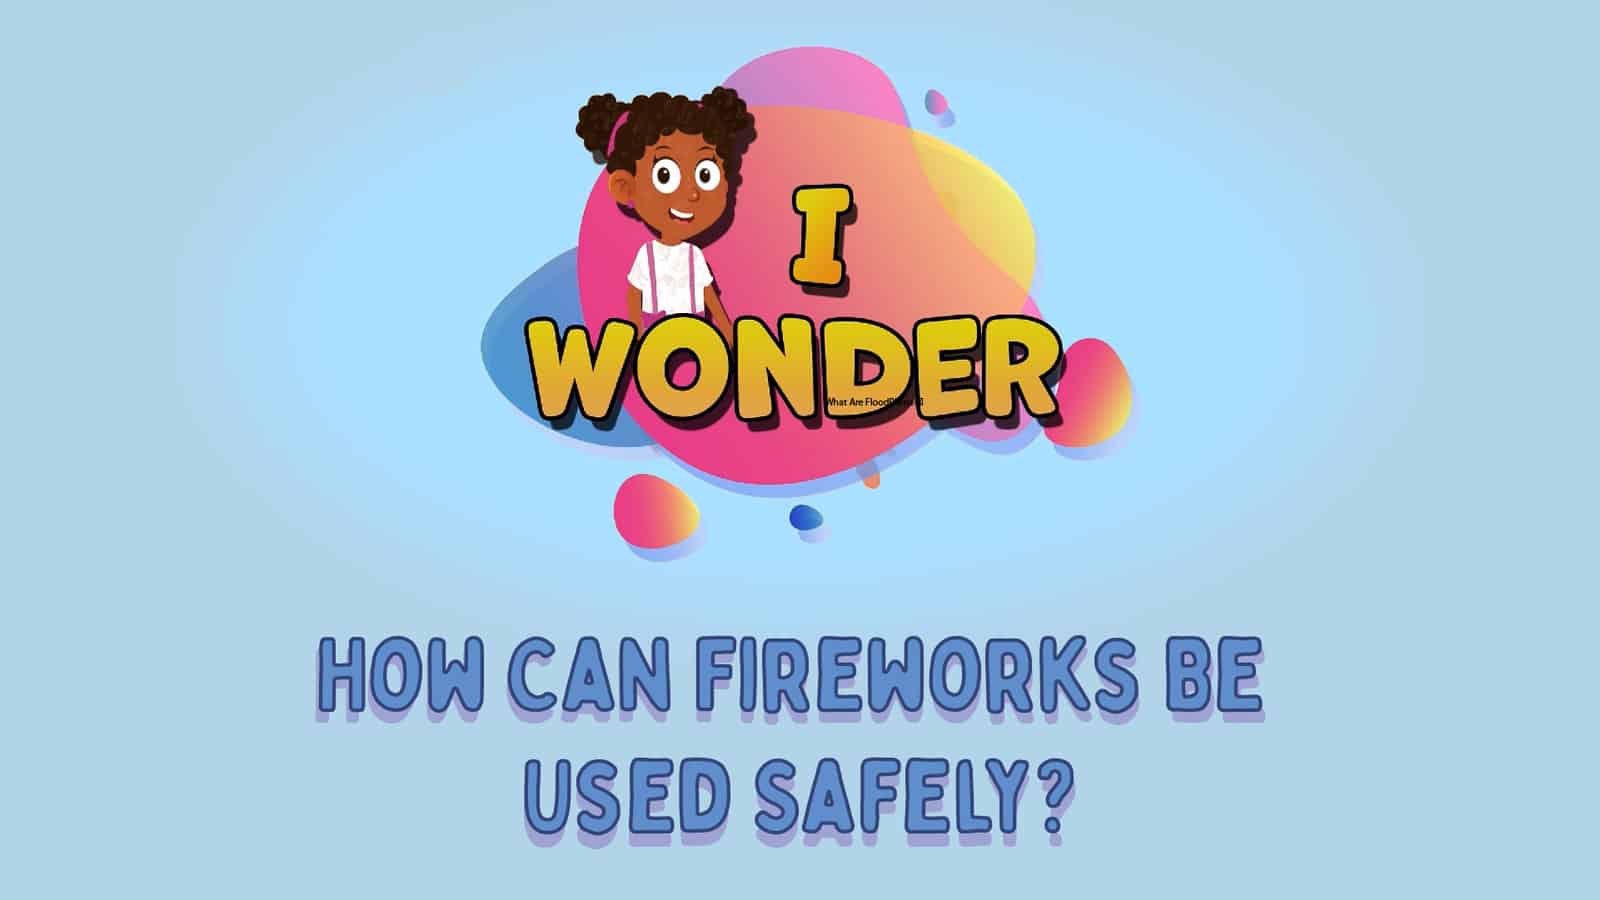 Fireworks Be Used Safely LearningMole